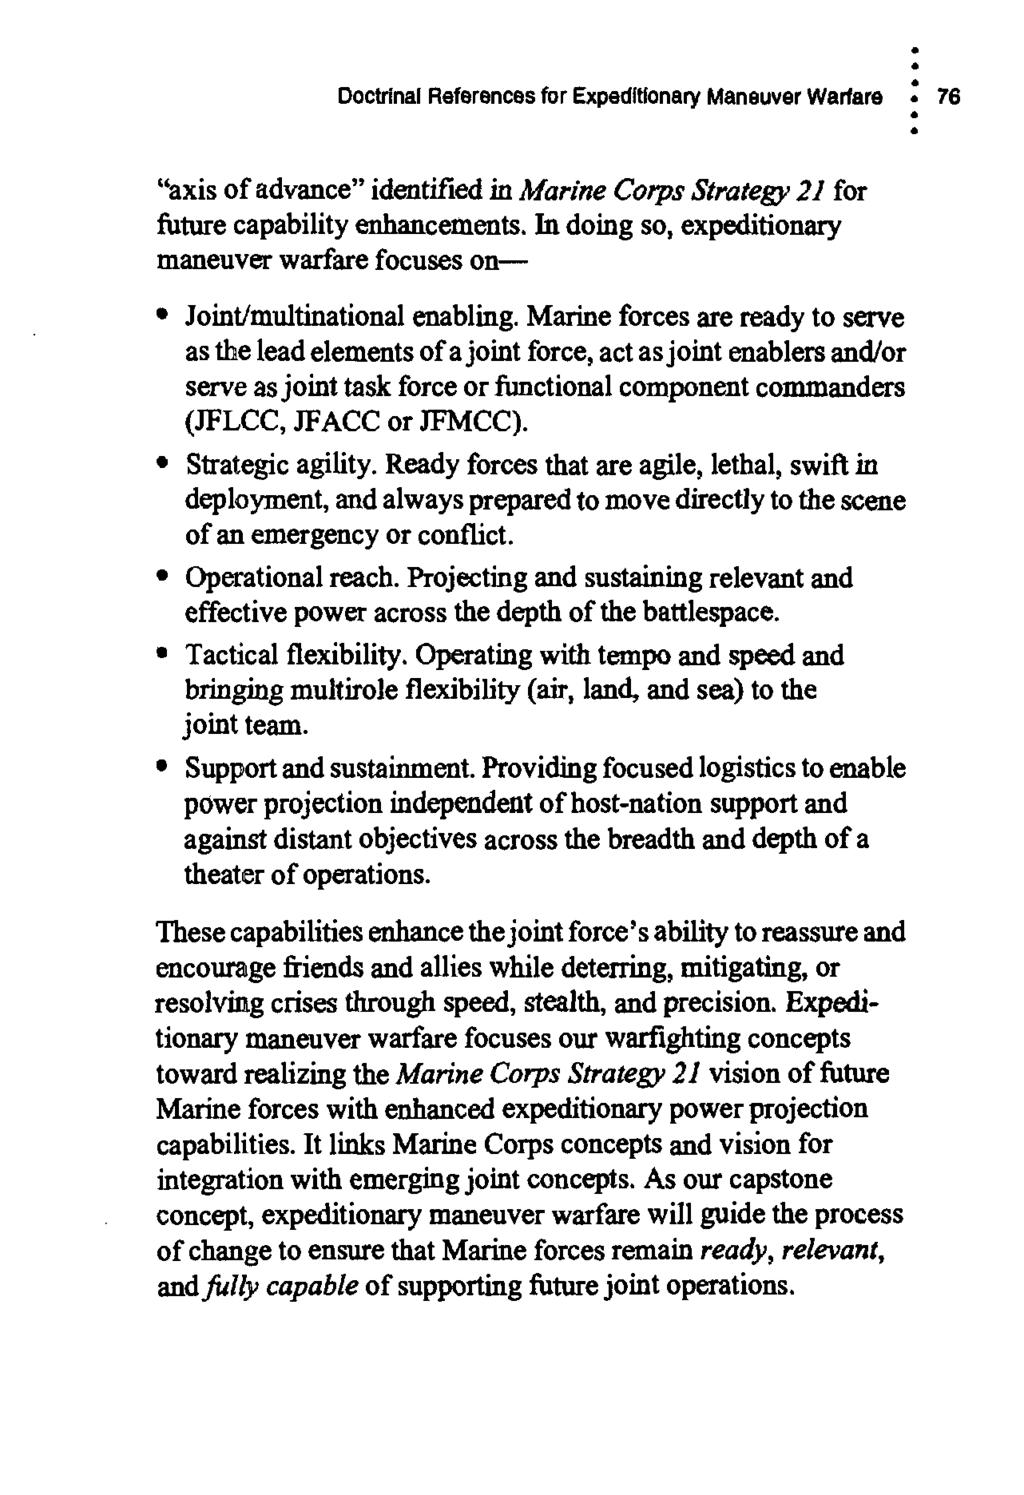 Doctrinal References for Expeditionary Maneuver Warfare 76 "axis of advance" identified in Marine Corps Strategy 21 for future capability enhancements.